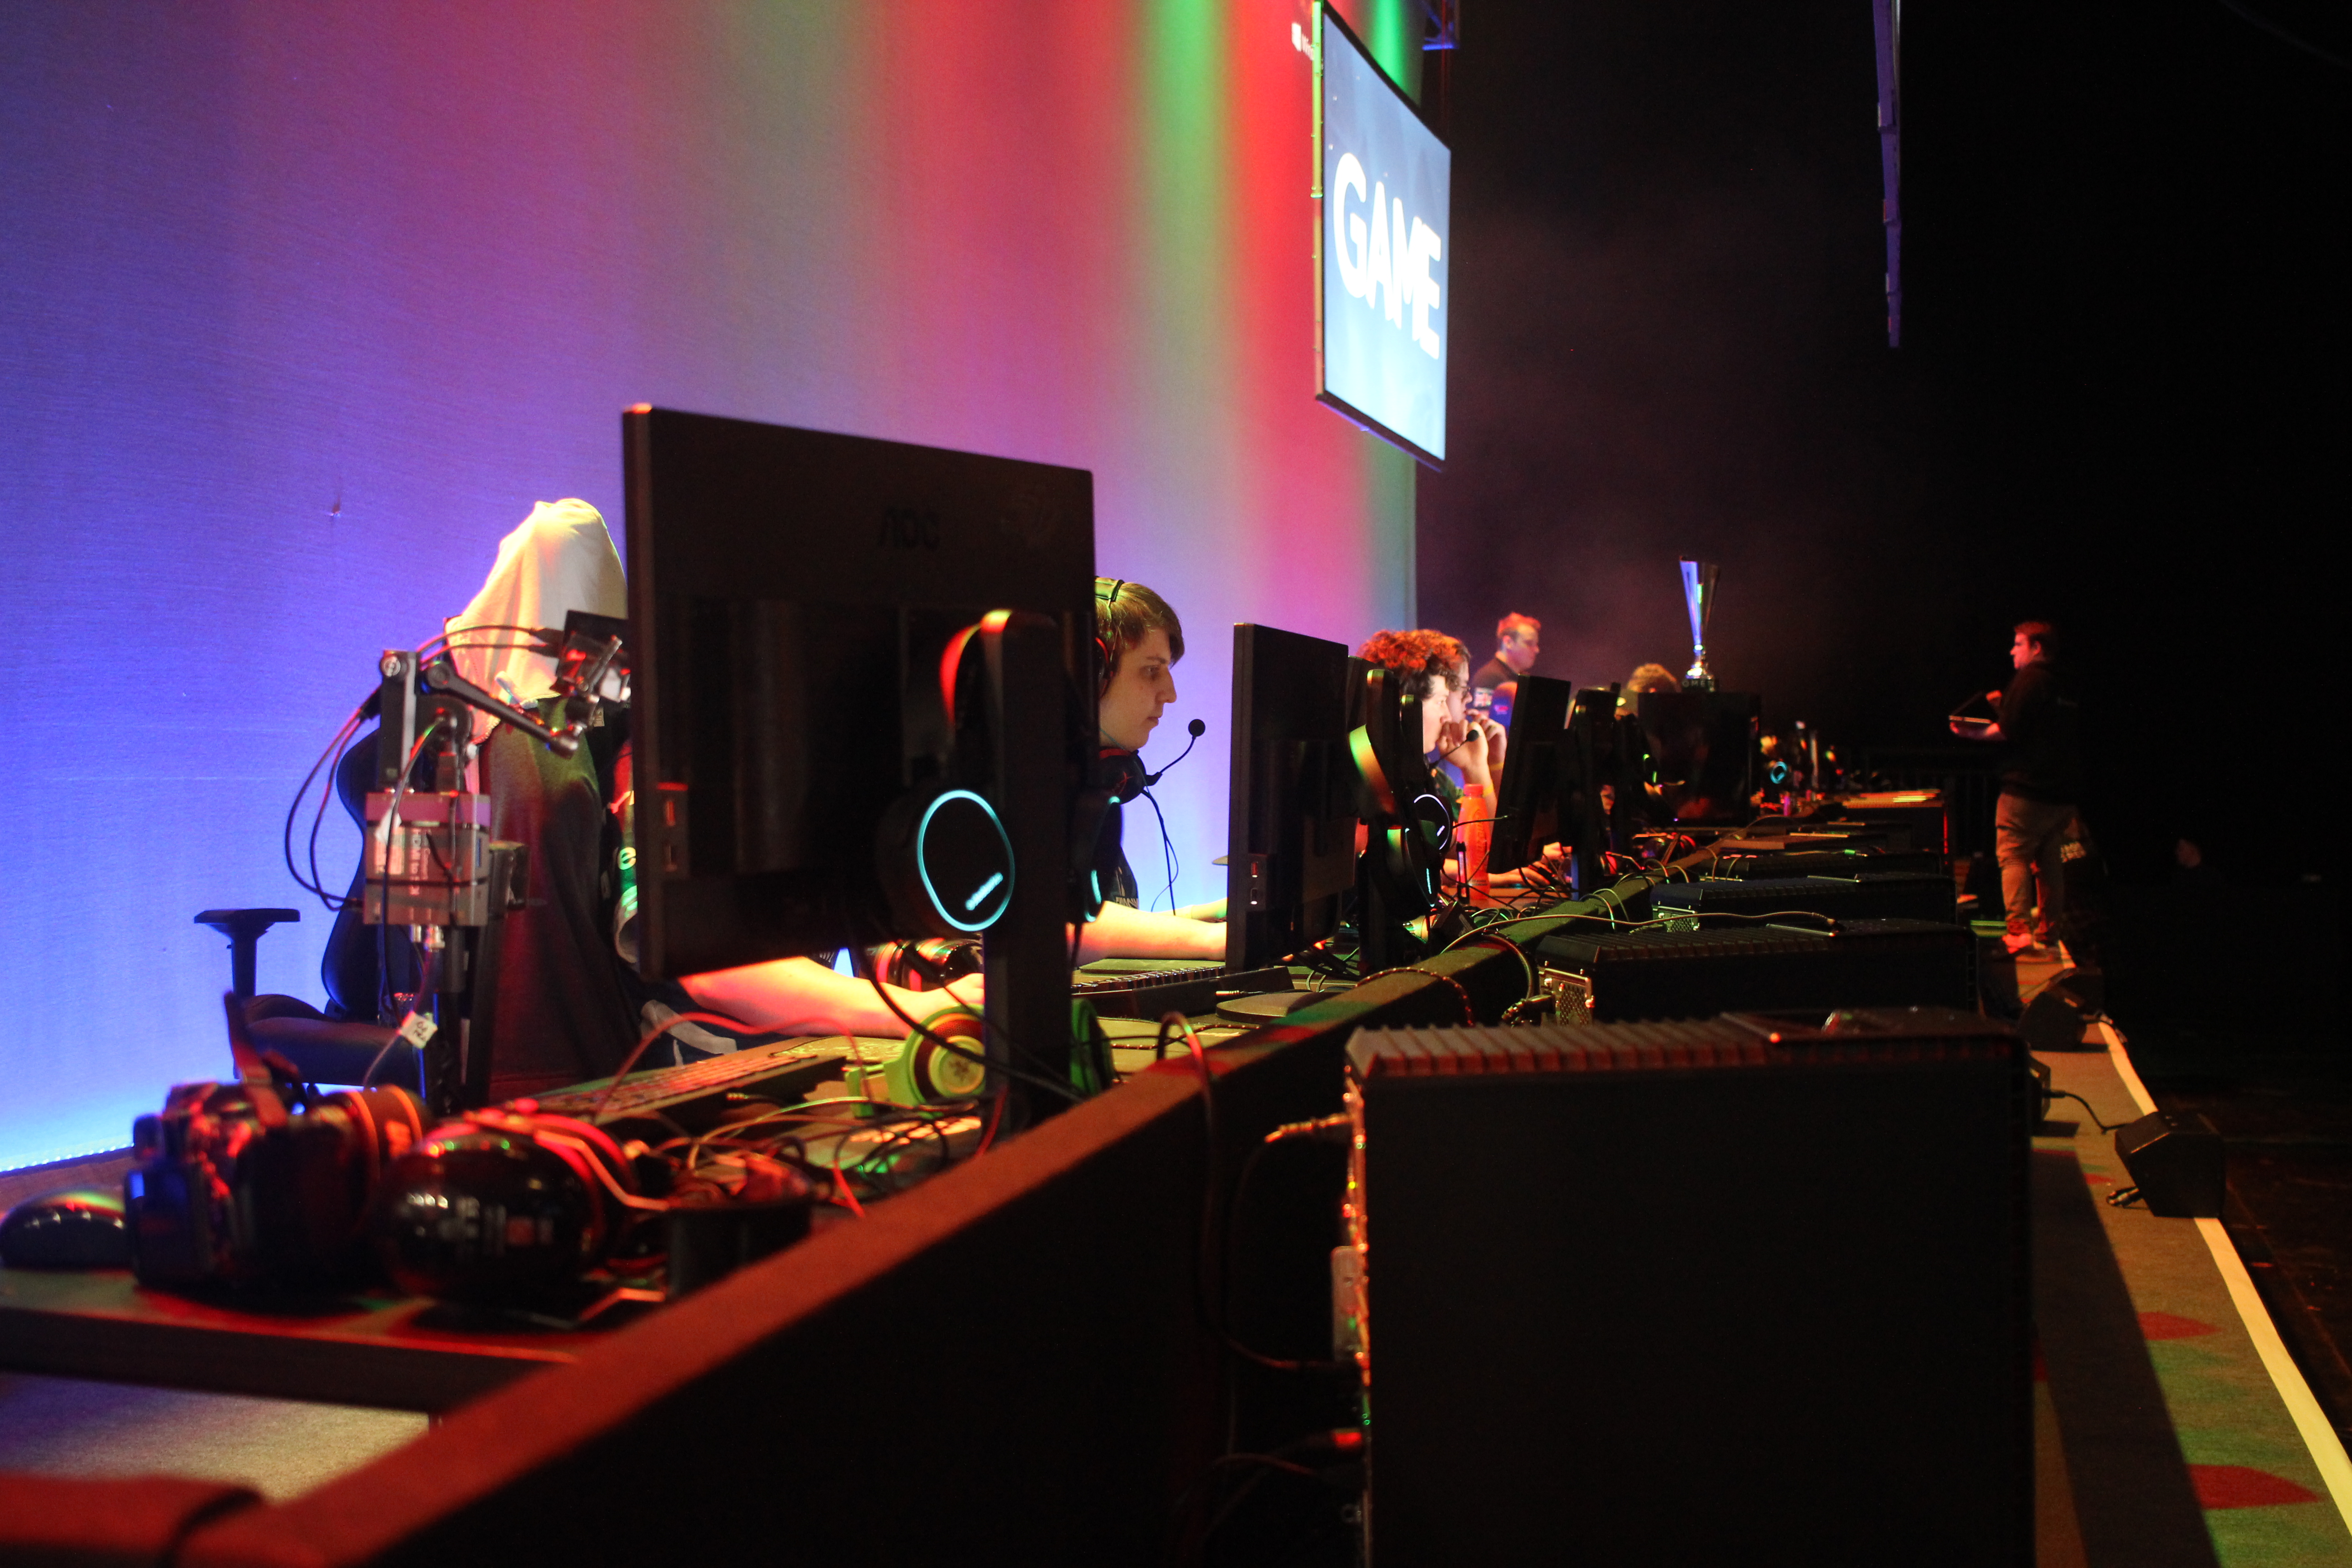 endpoint, insomnia59